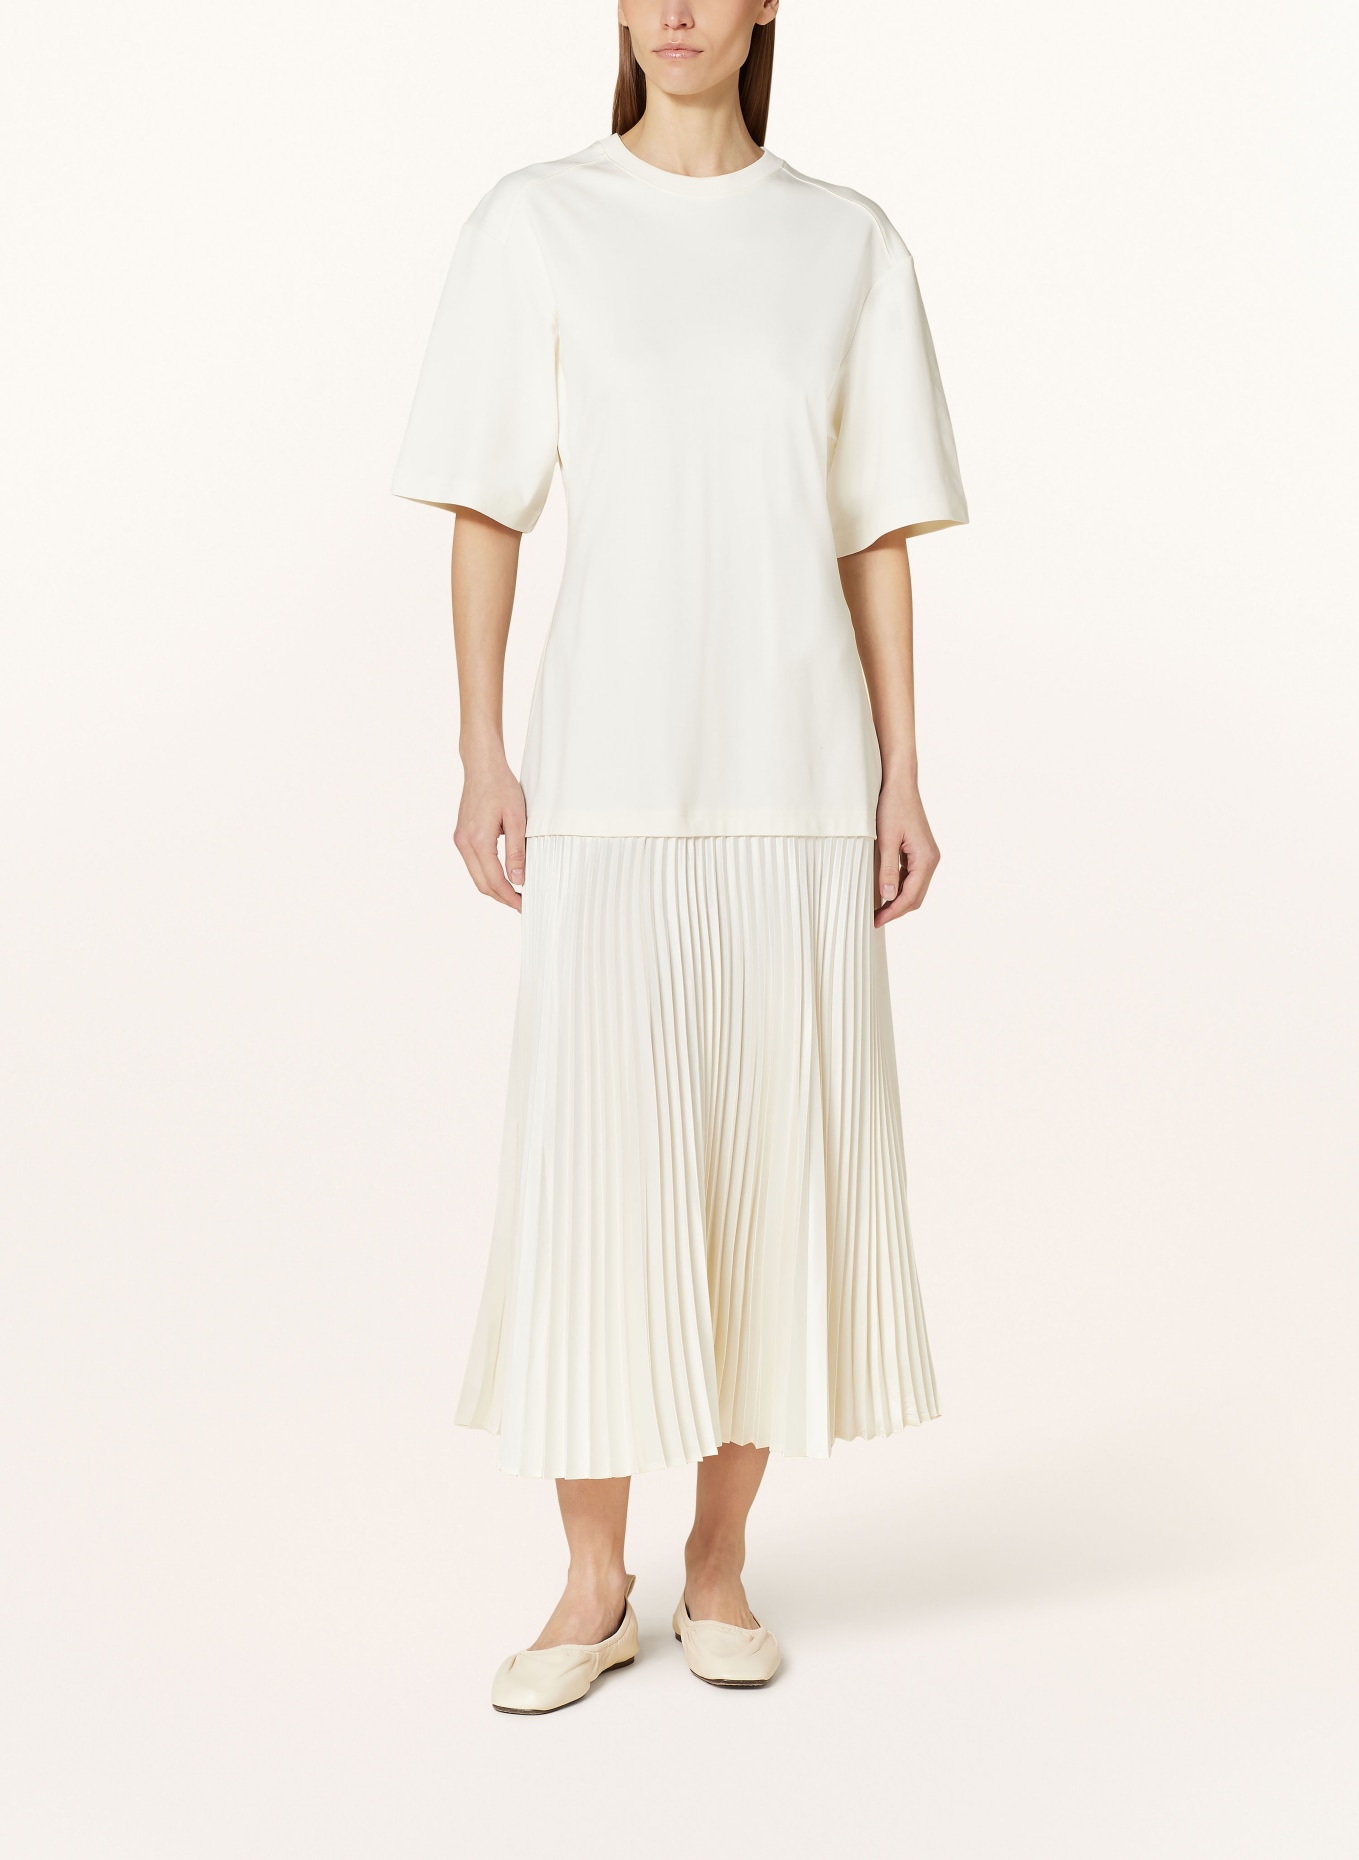 COS Dress in mixed materials, Color: WHITE (Image 2)